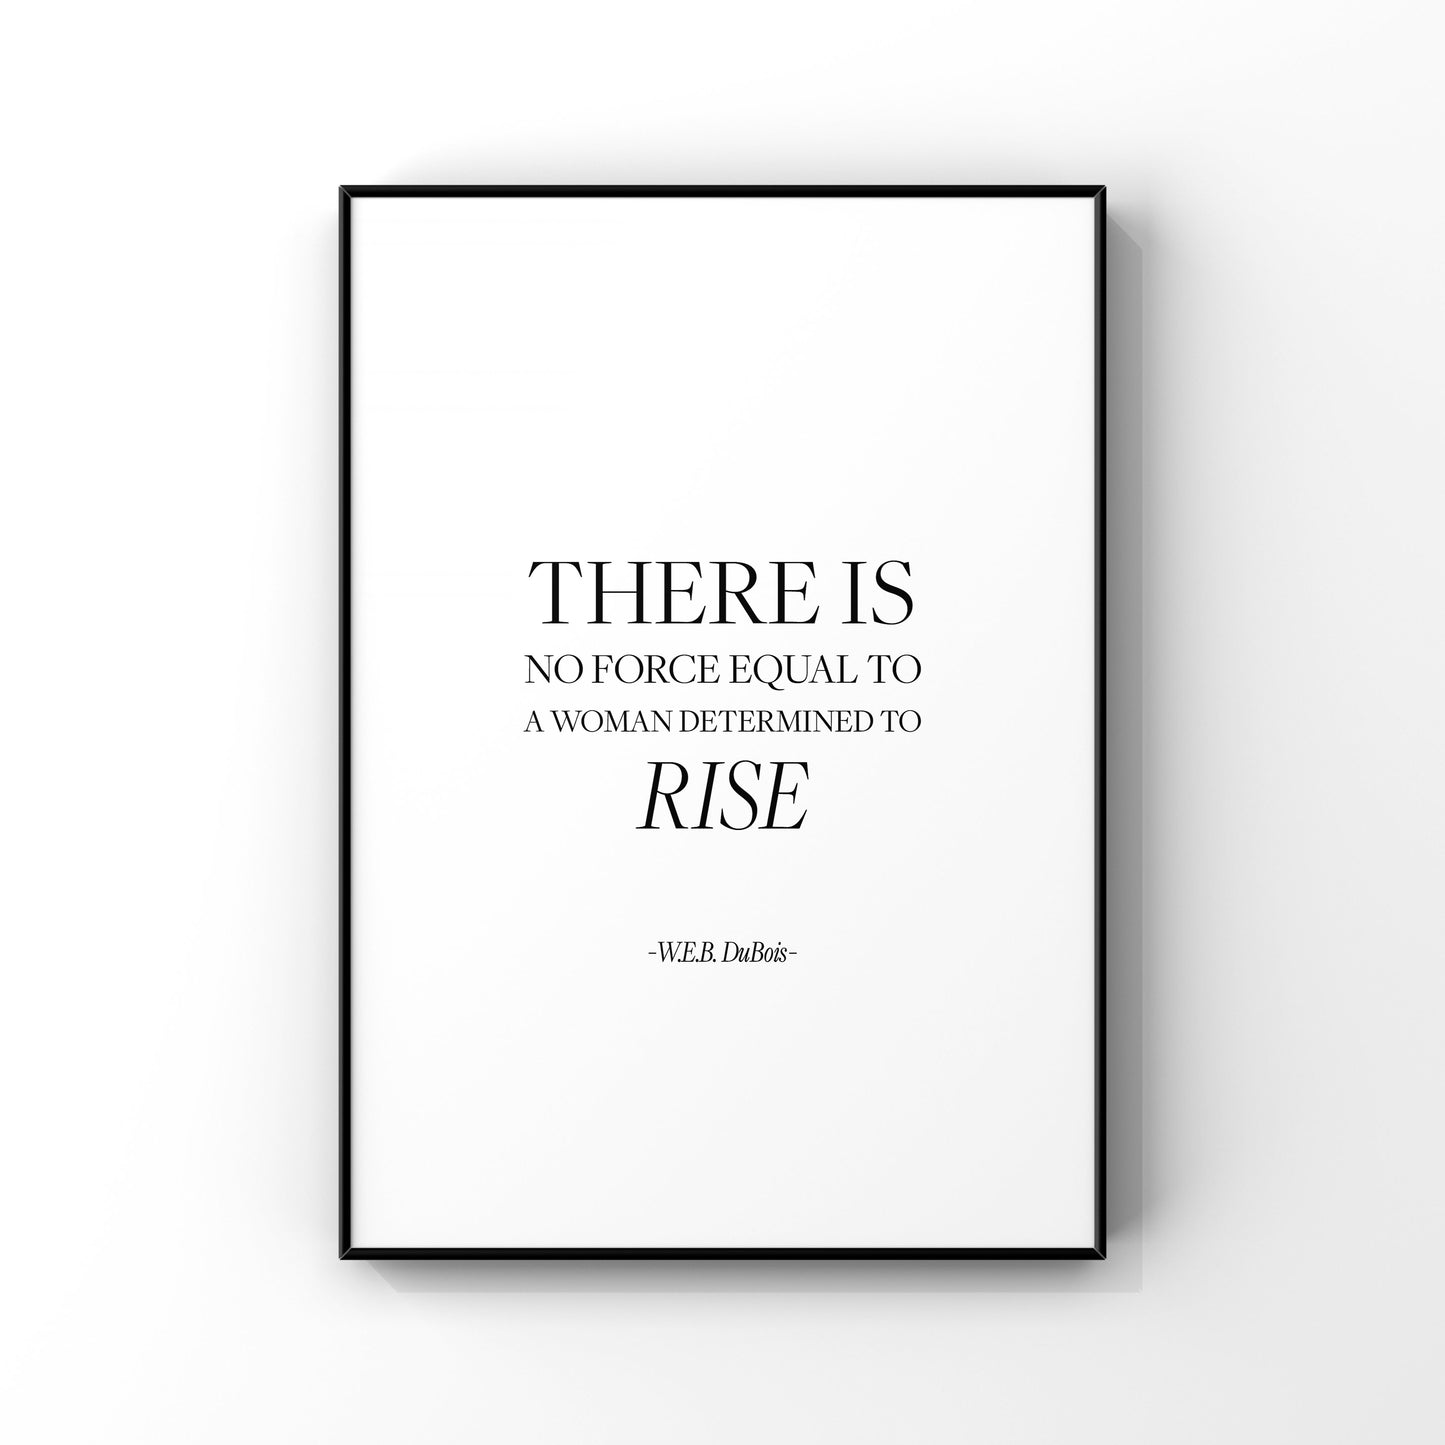 There is no force equal to a woman determined to rise,W.E.B. DuBois quote,Women’s empowerment print,Inspirational print,Motivational saying